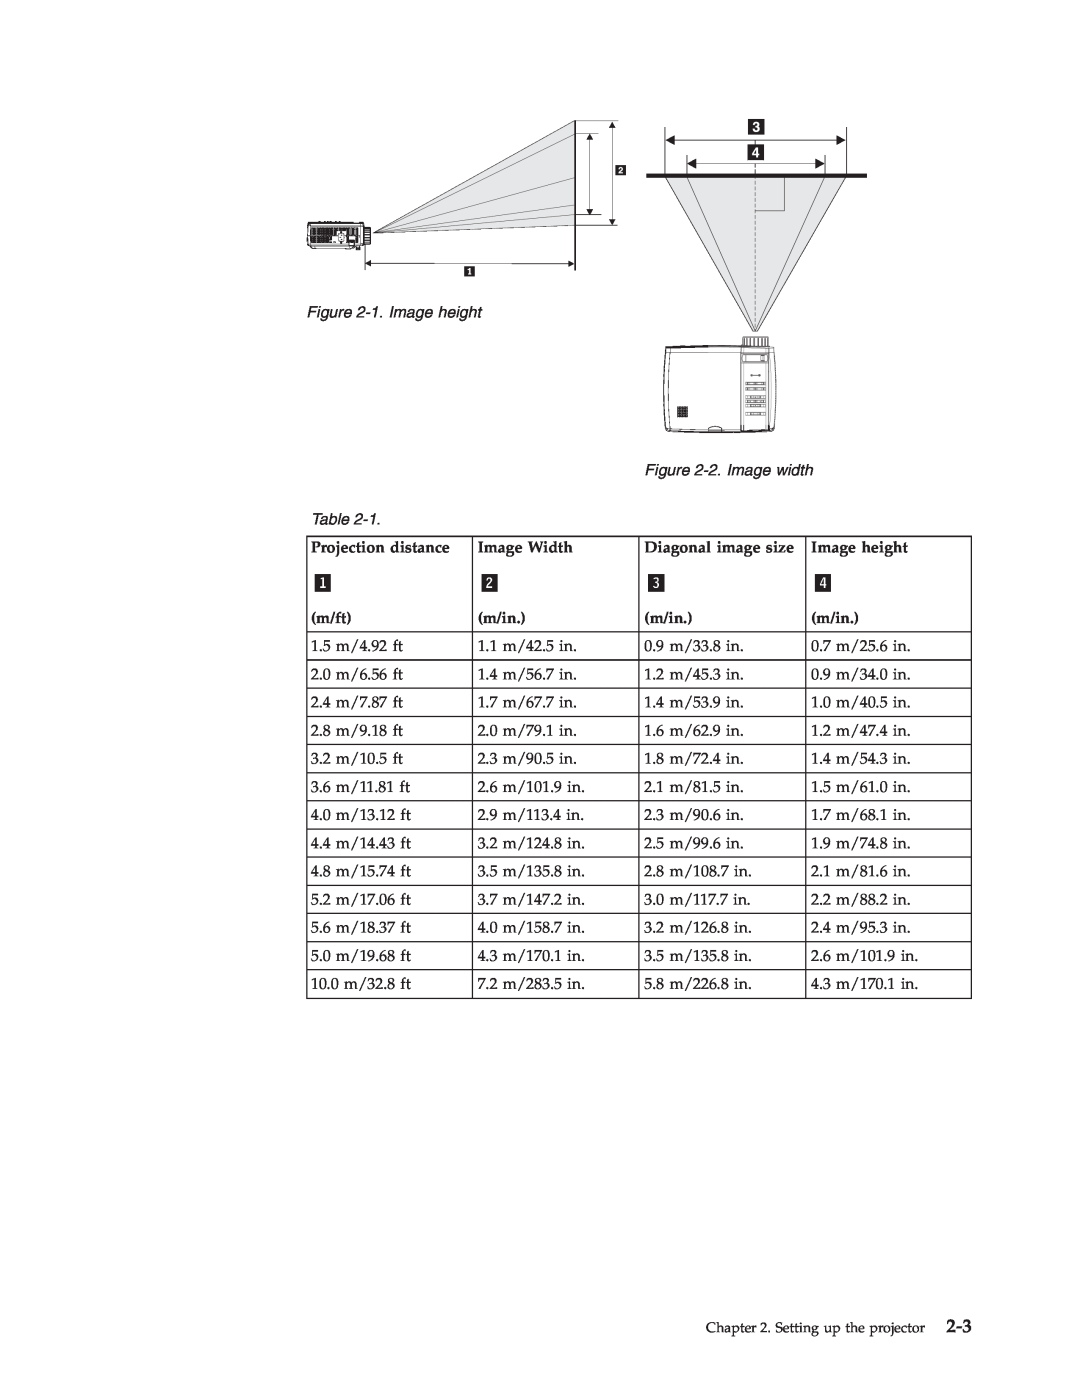 IBM PROJECTOR C400 manual 1. Image height, 2. Image width, Setting up the projector 